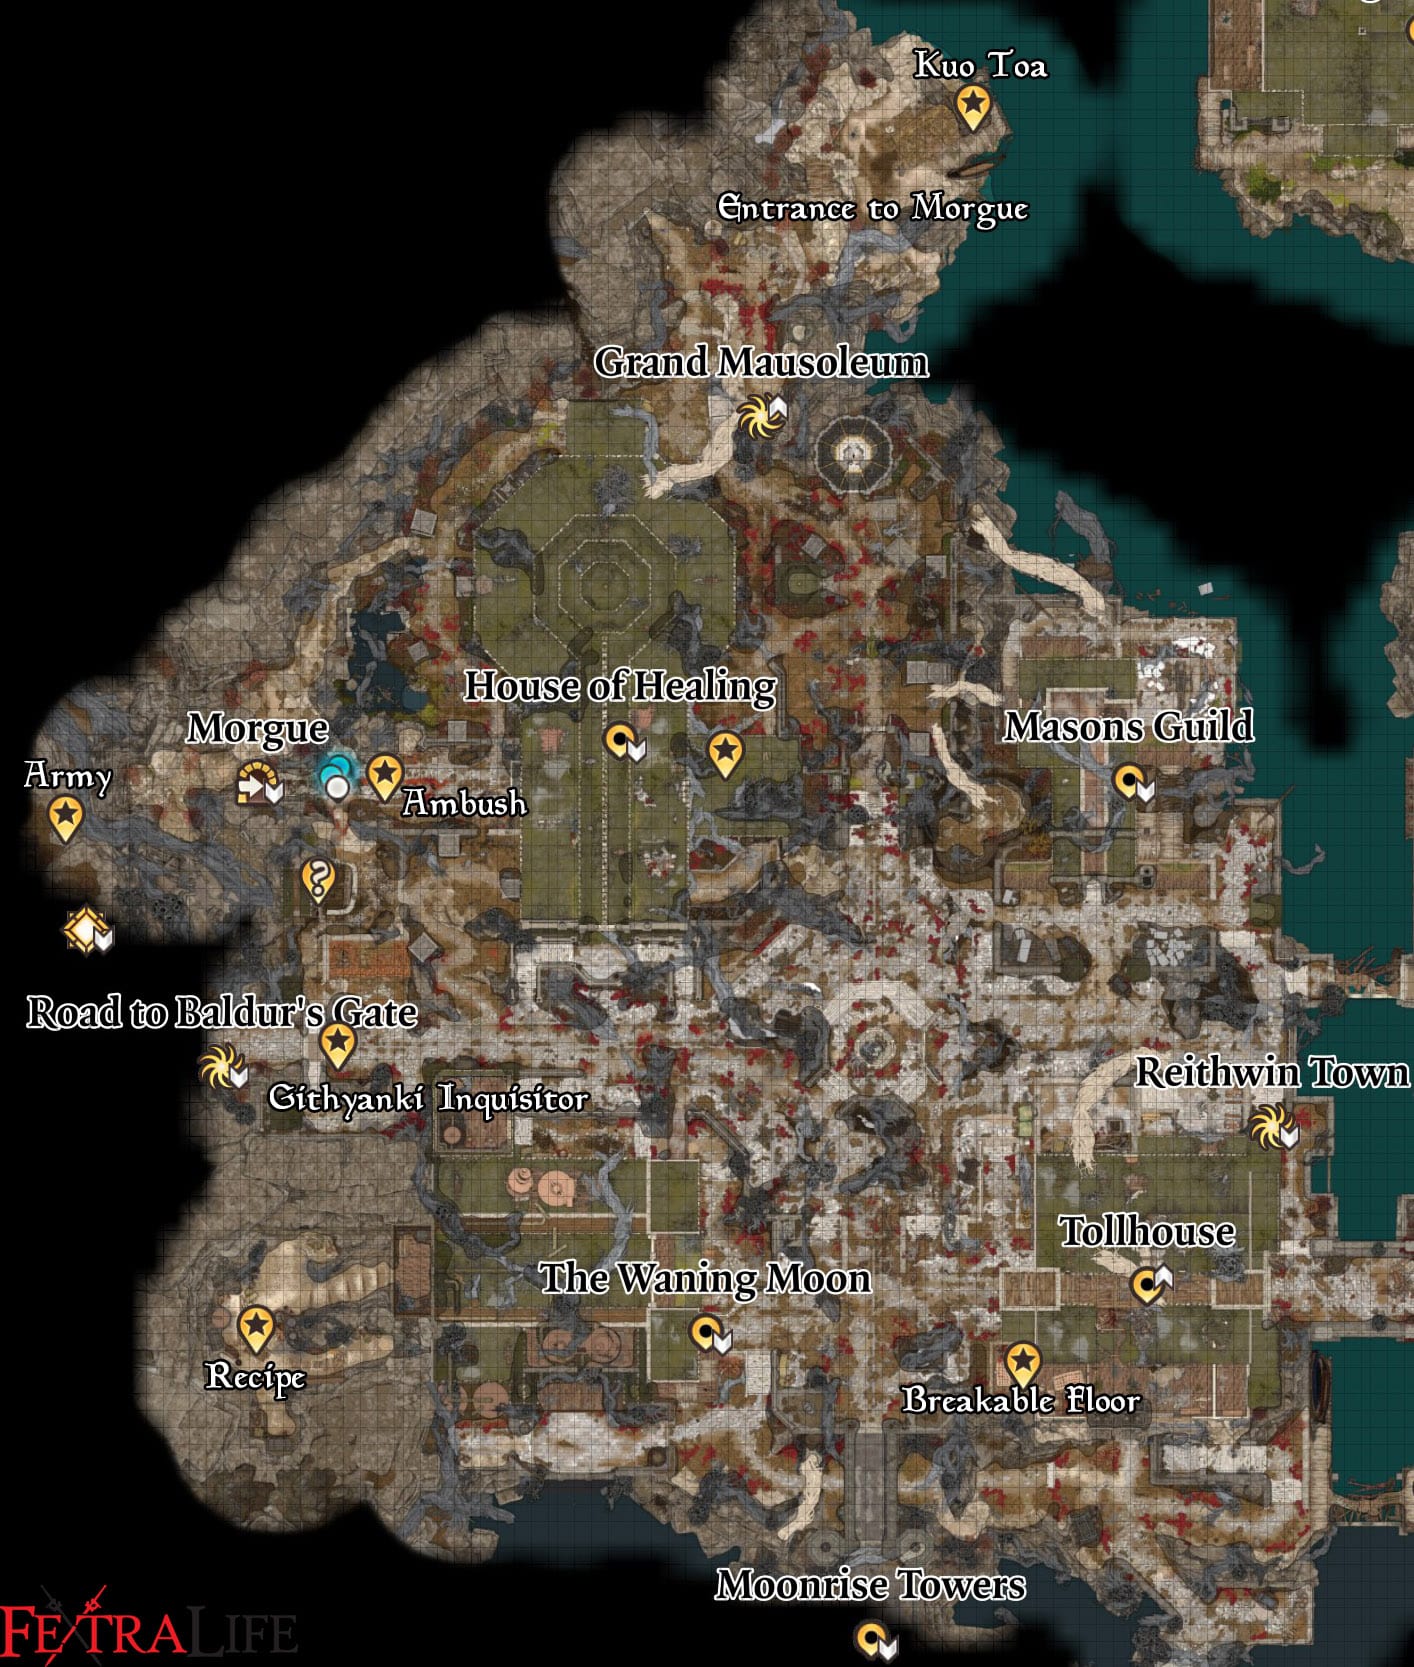 Arcane Odyssey Map - Full Locations Guide! - Try Hard Guides